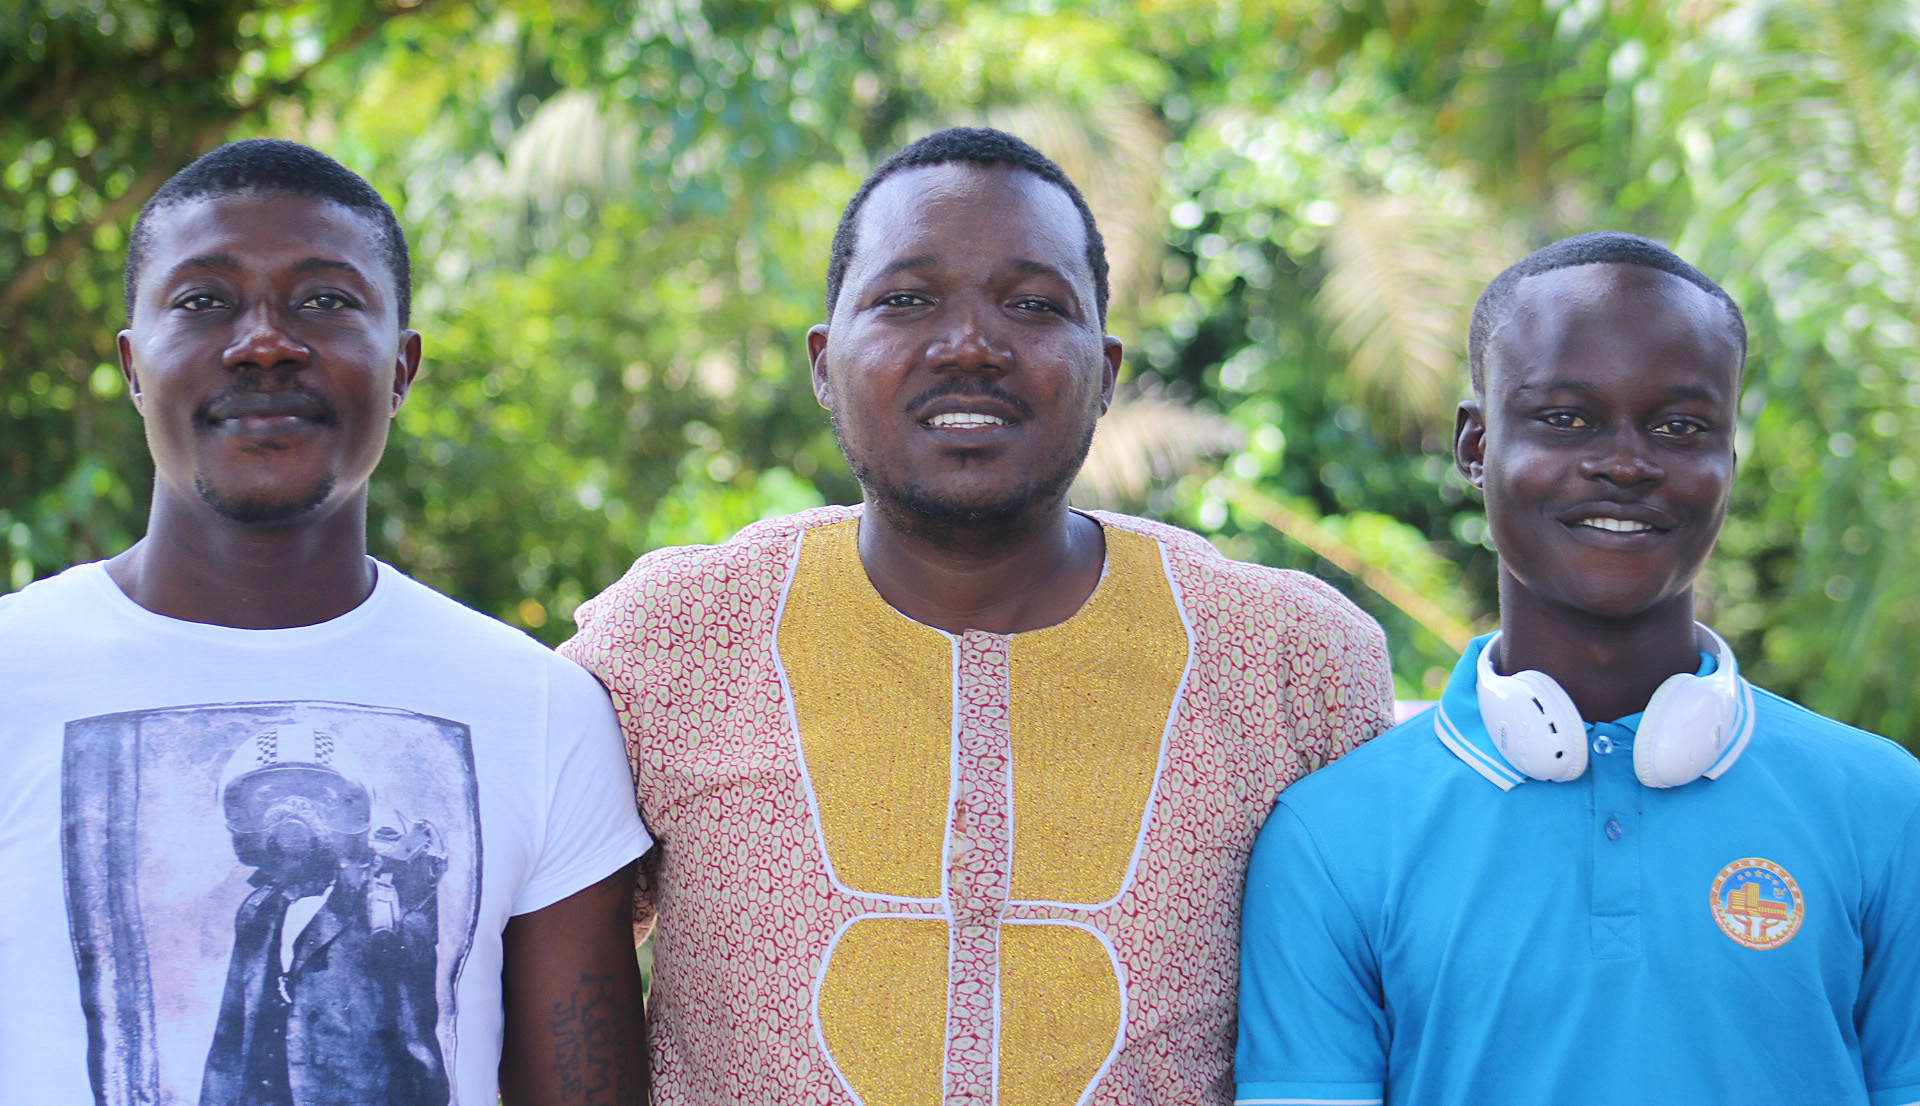 Jefferson Knight (center), director of the human rights agency of The United Methodist Church in Liberia, stands with residents of the New Life Recovery Center, Romeo “Jean Papi” Sonpon (left) and Life Buan. Photo by E Julu Swen, UMNS.